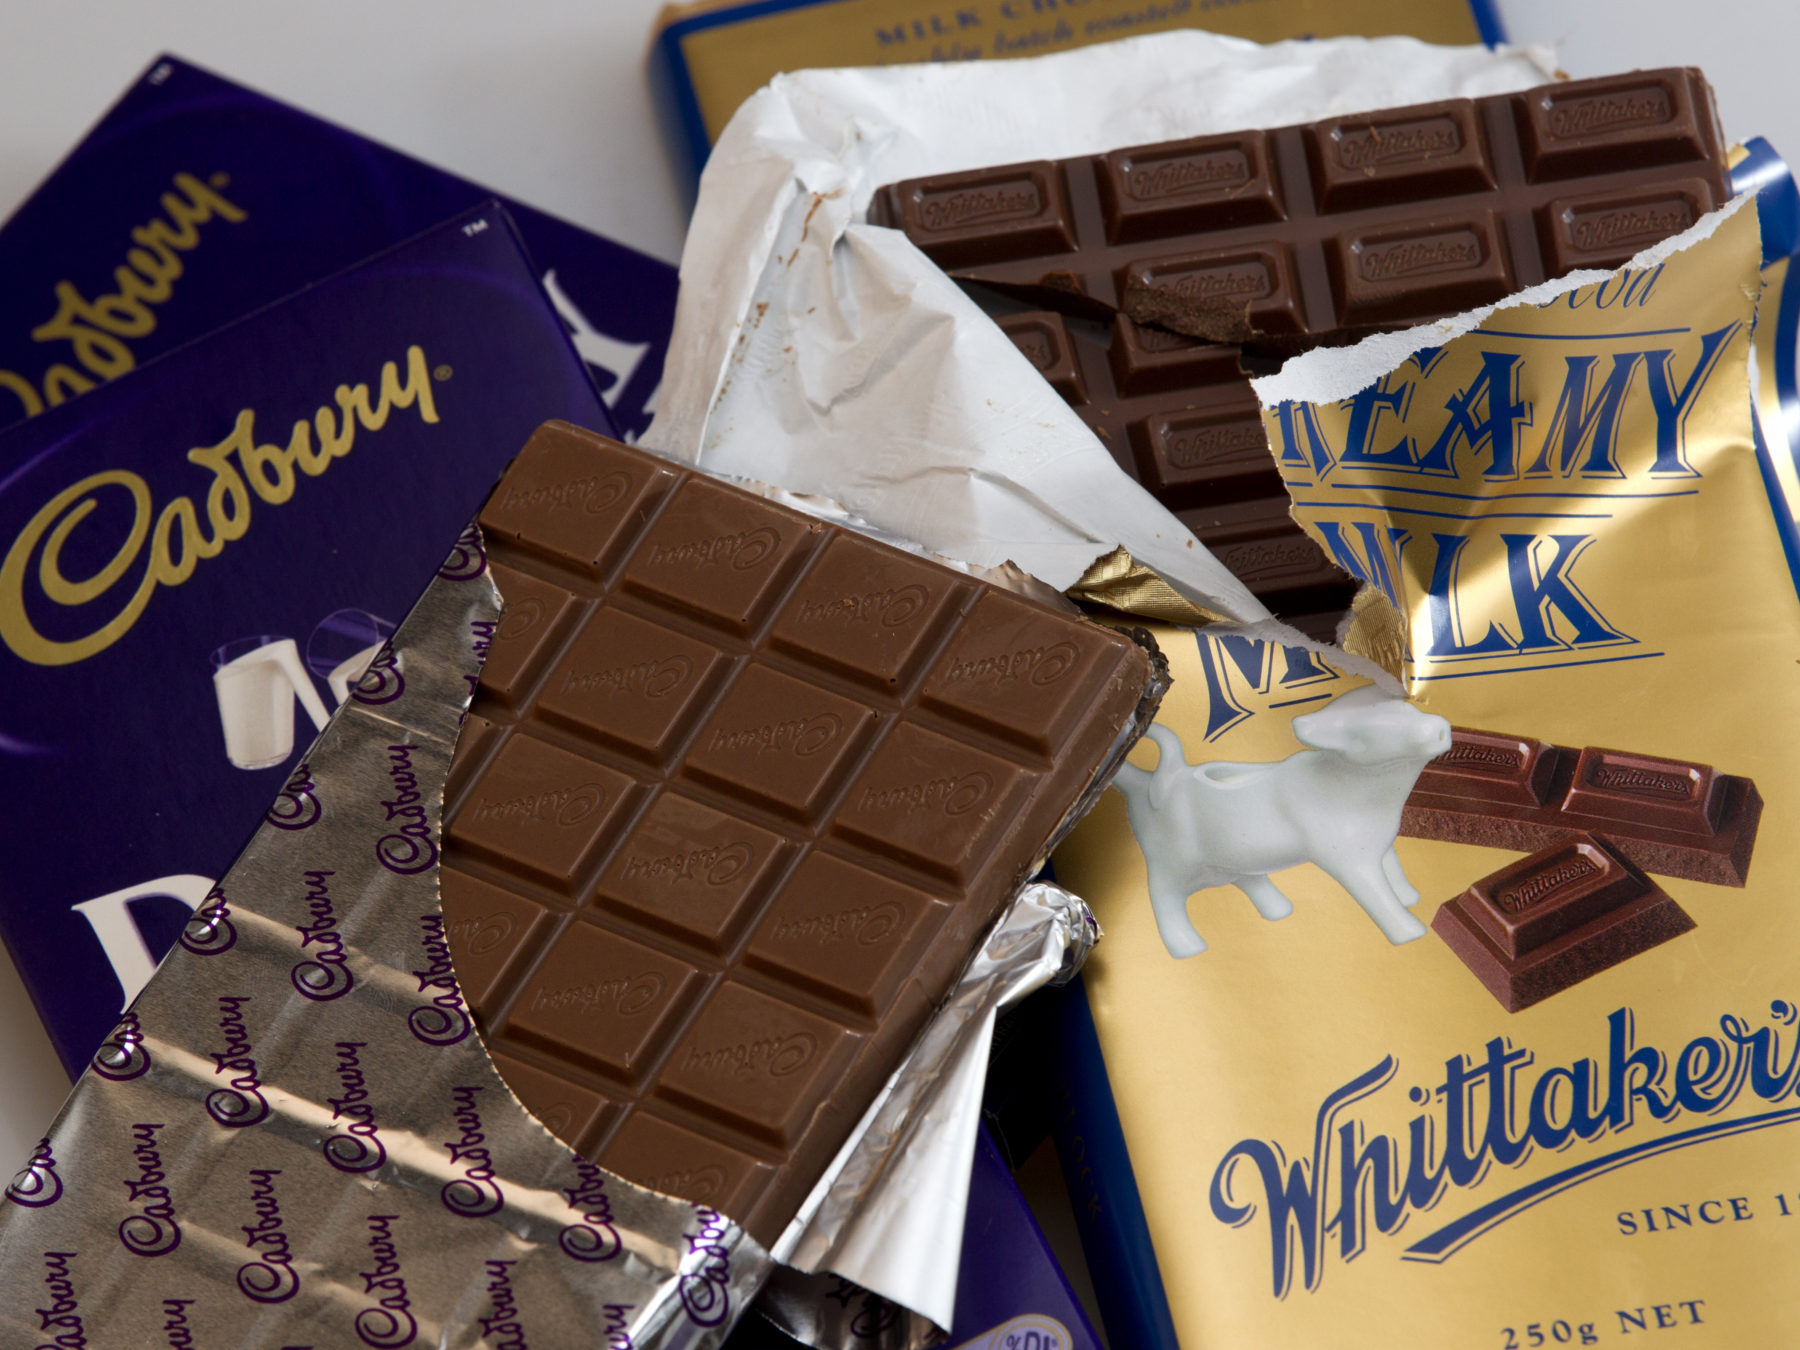 The Most Expensive Chocolate Bar - How Much It Costs - Snack History